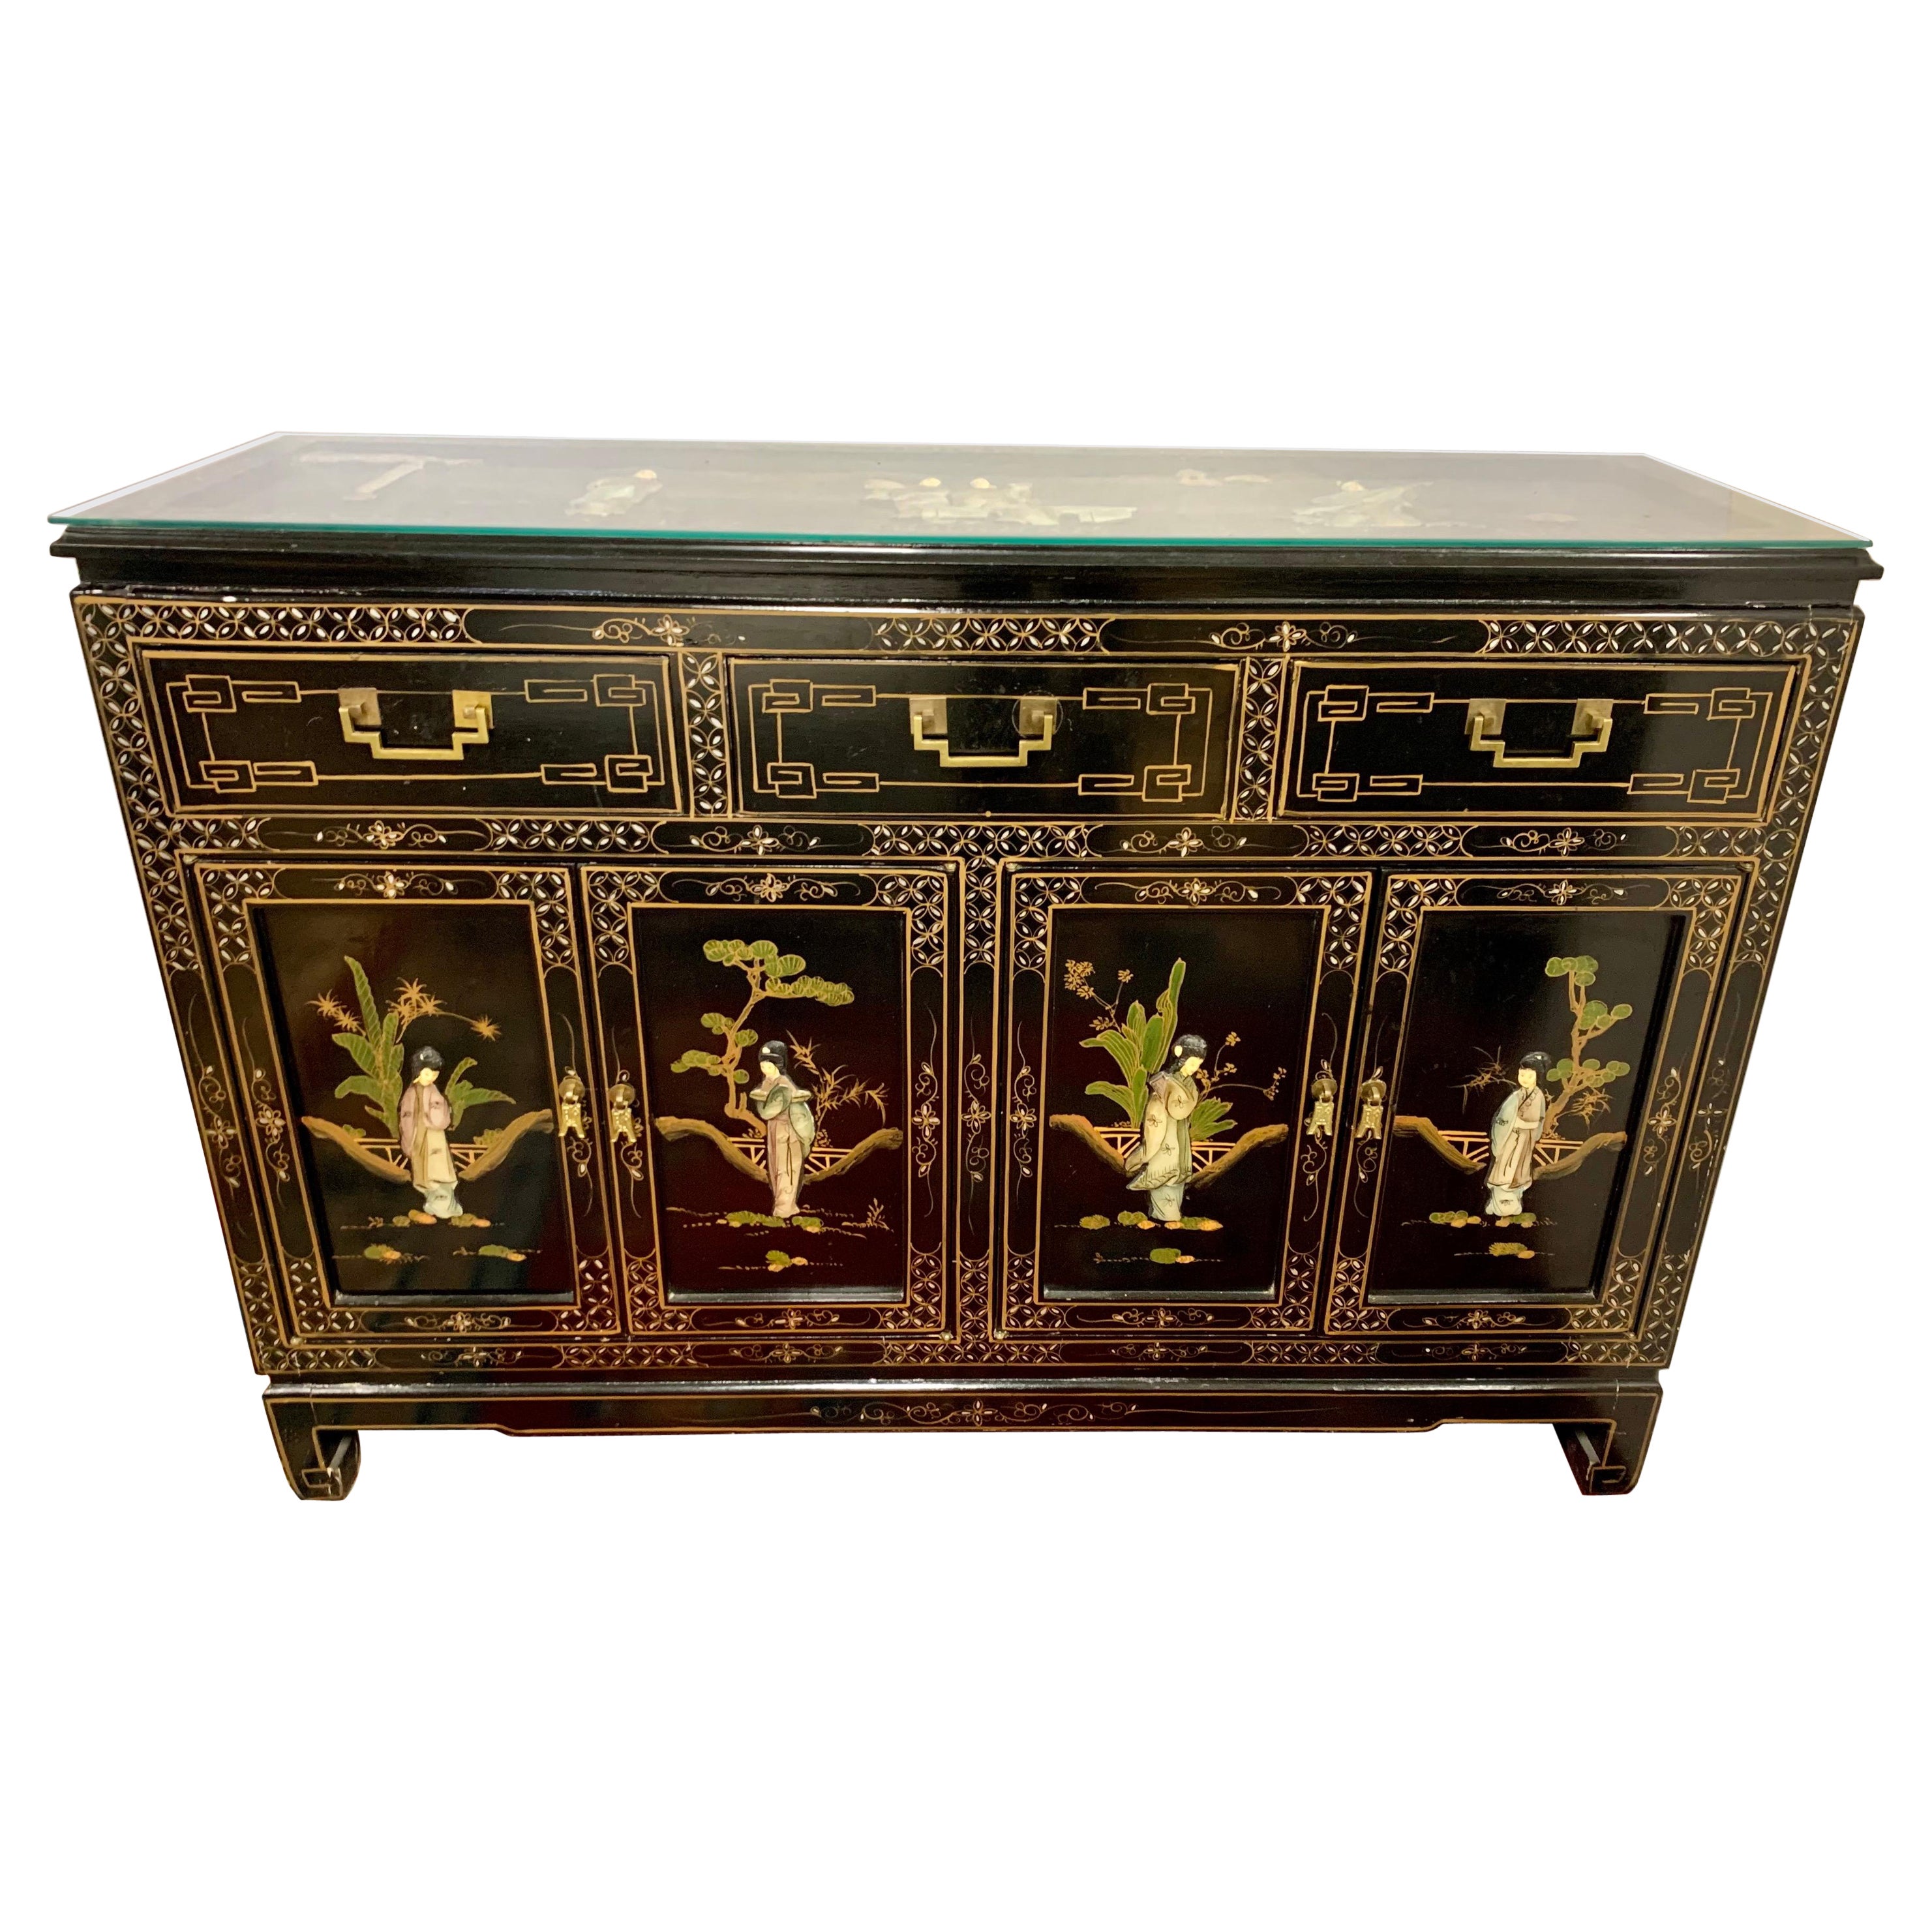 Chinoiserie Black Laquered Carved Credenza Sideboard